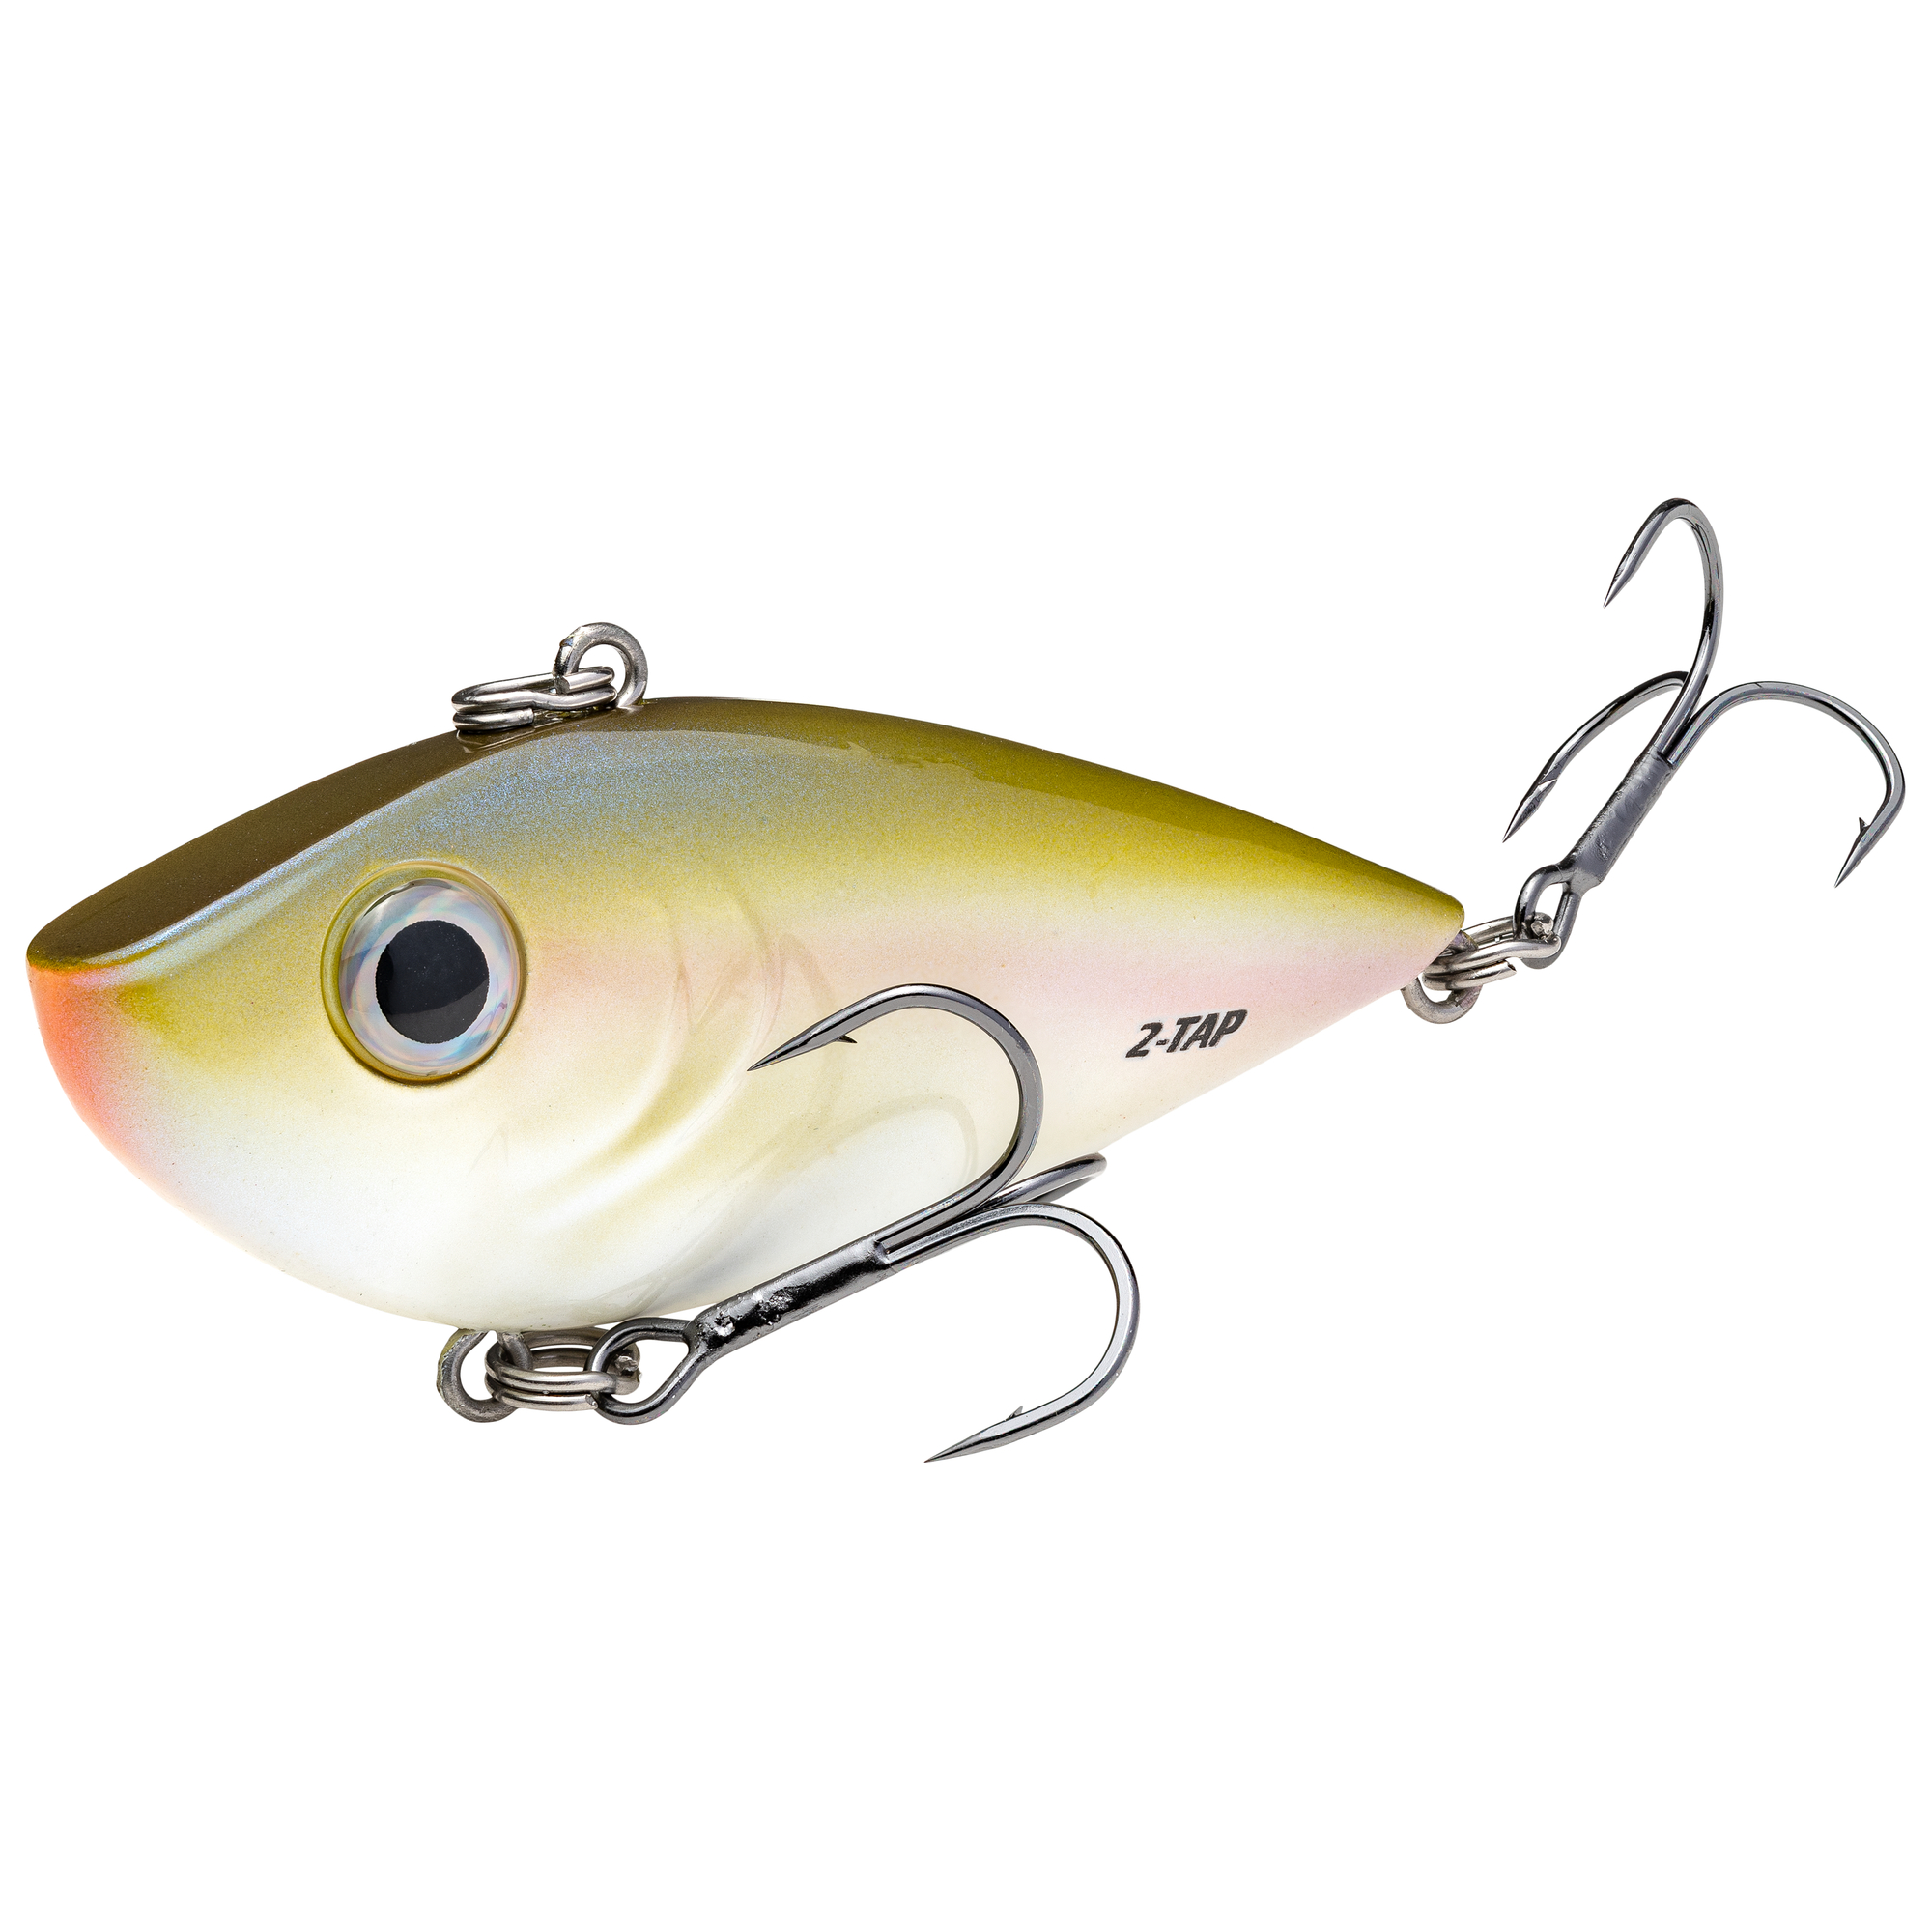 Strike King Red Eyed Shad 2-Tap Tungsten 1/2 oz The Shizzle